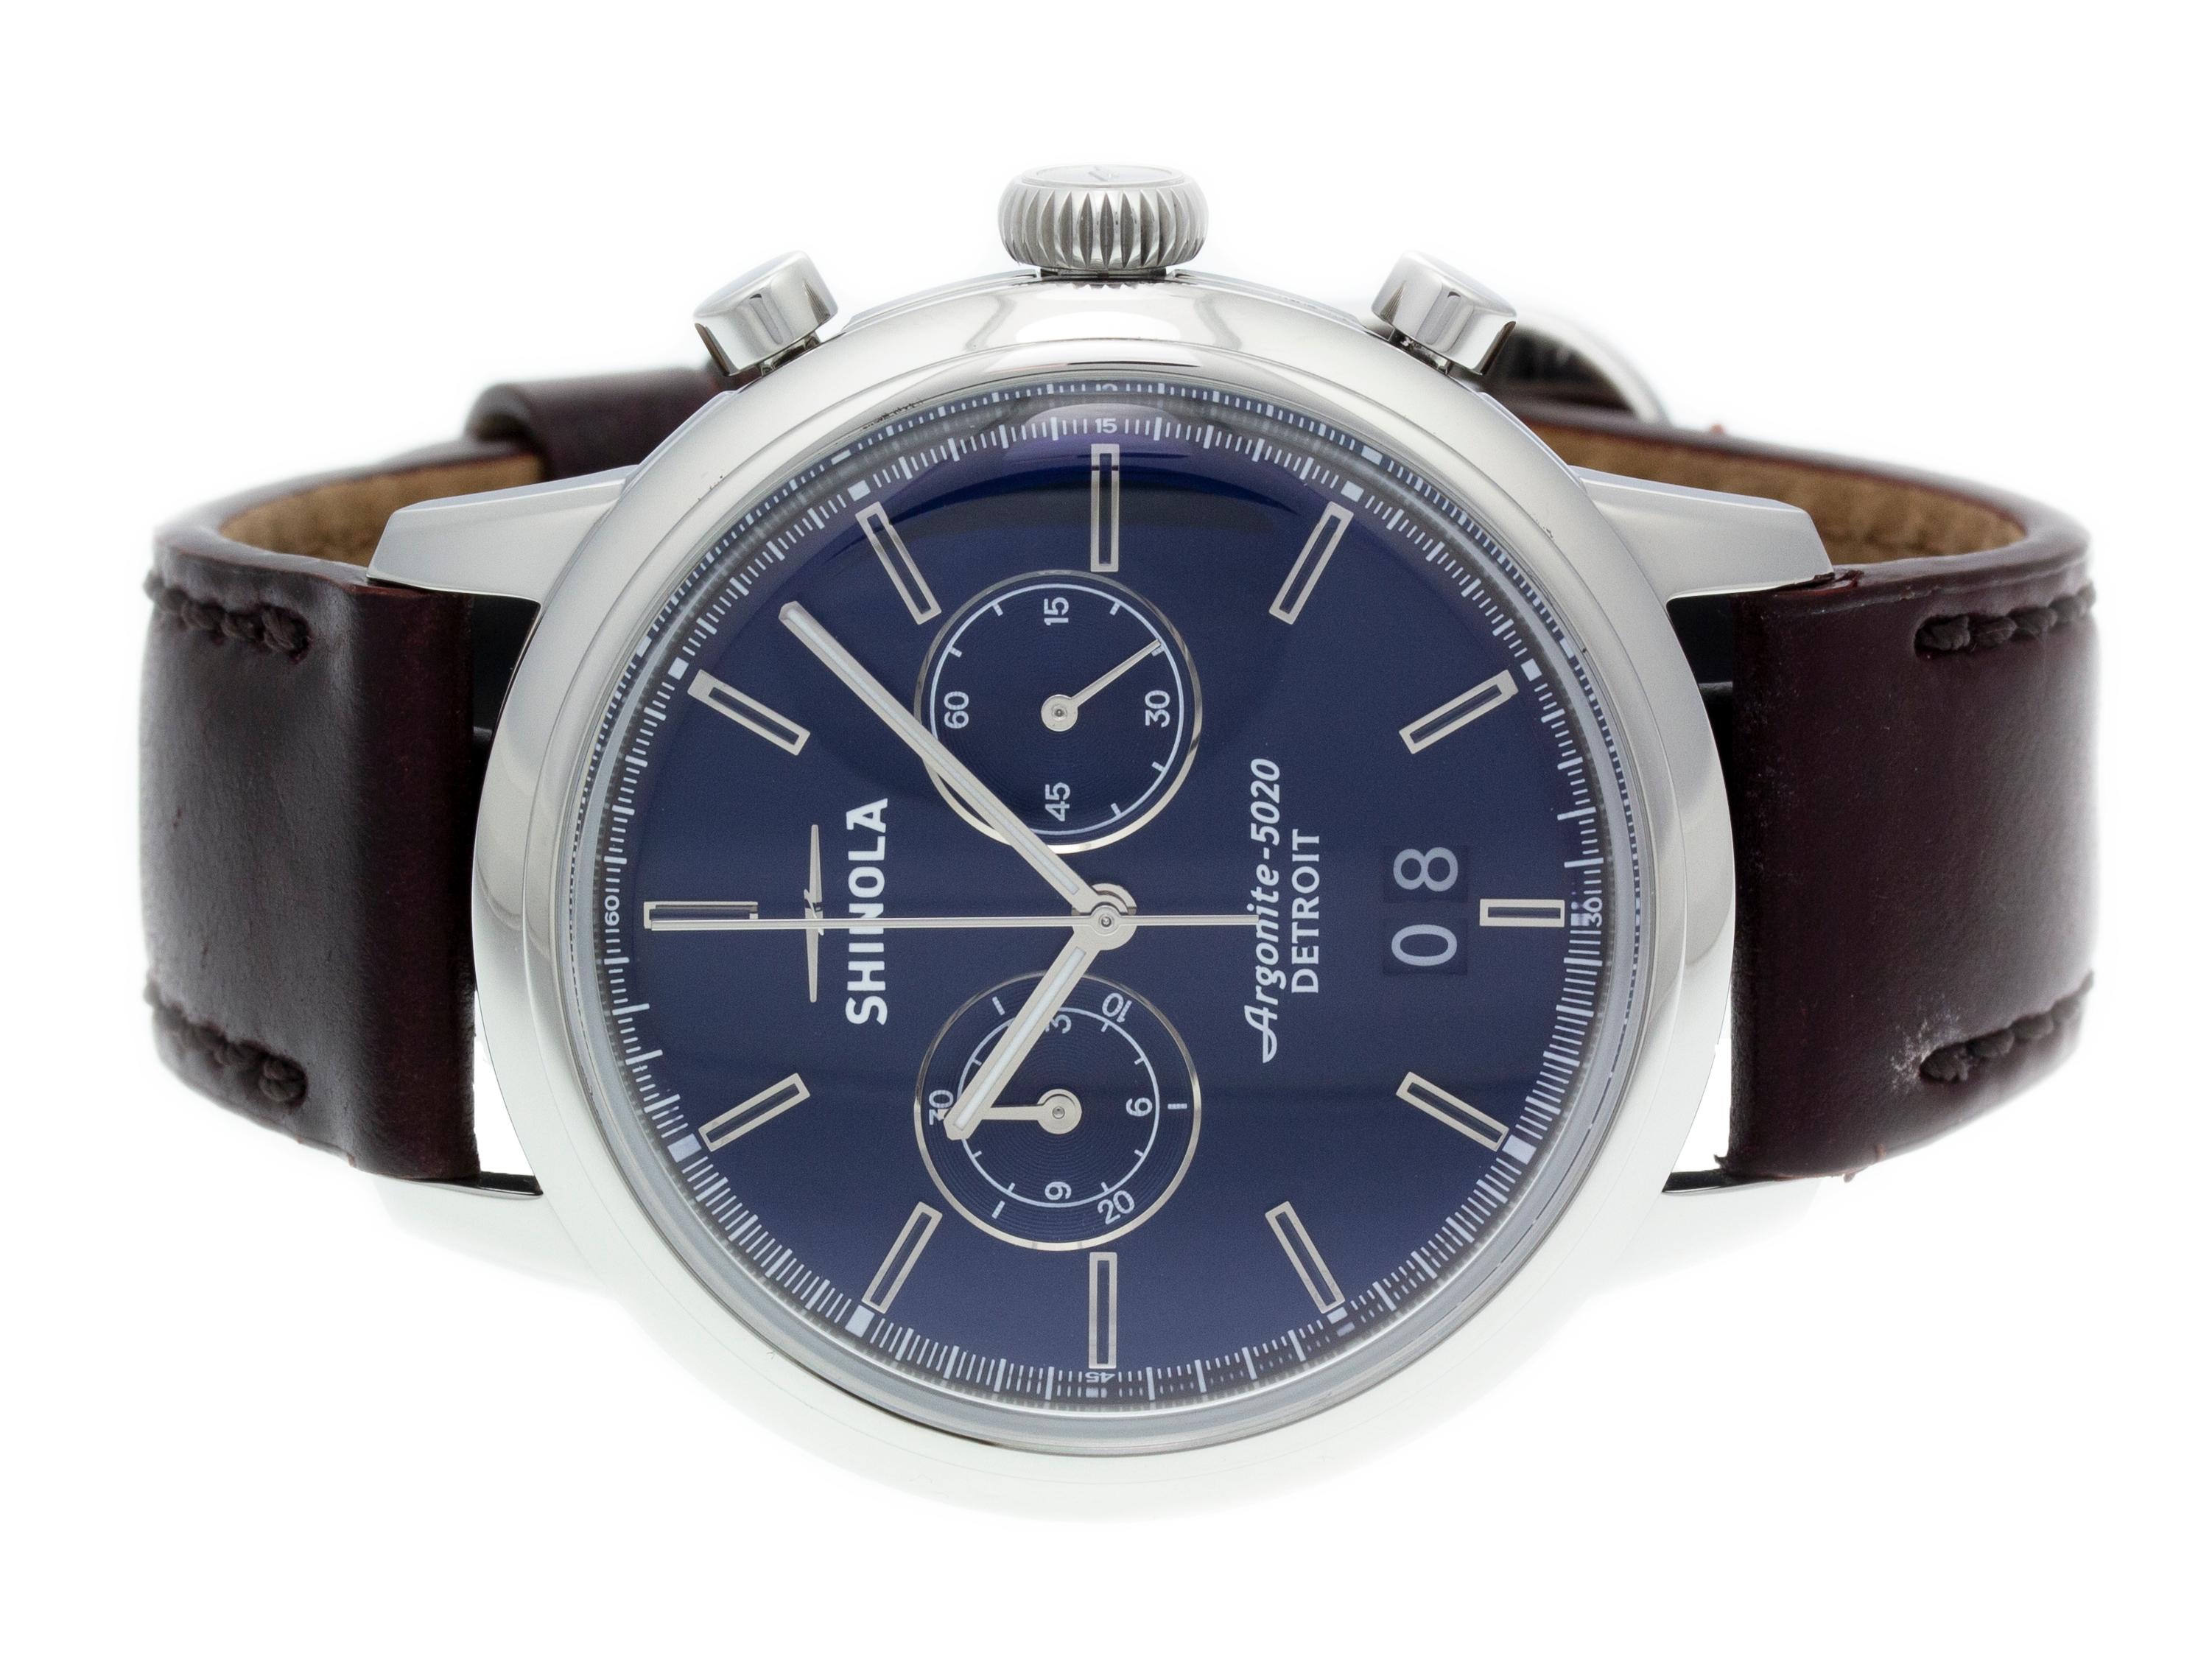 Stainless steel Shinola The Bedrock Chrono quartz watch with a 42mm case, midnight blue dial, and brown leather strap with tang buckle. Features include hours, minutes, seconds, date, and chronograph. Comes with a Shinola Box & Manual and 2 Year